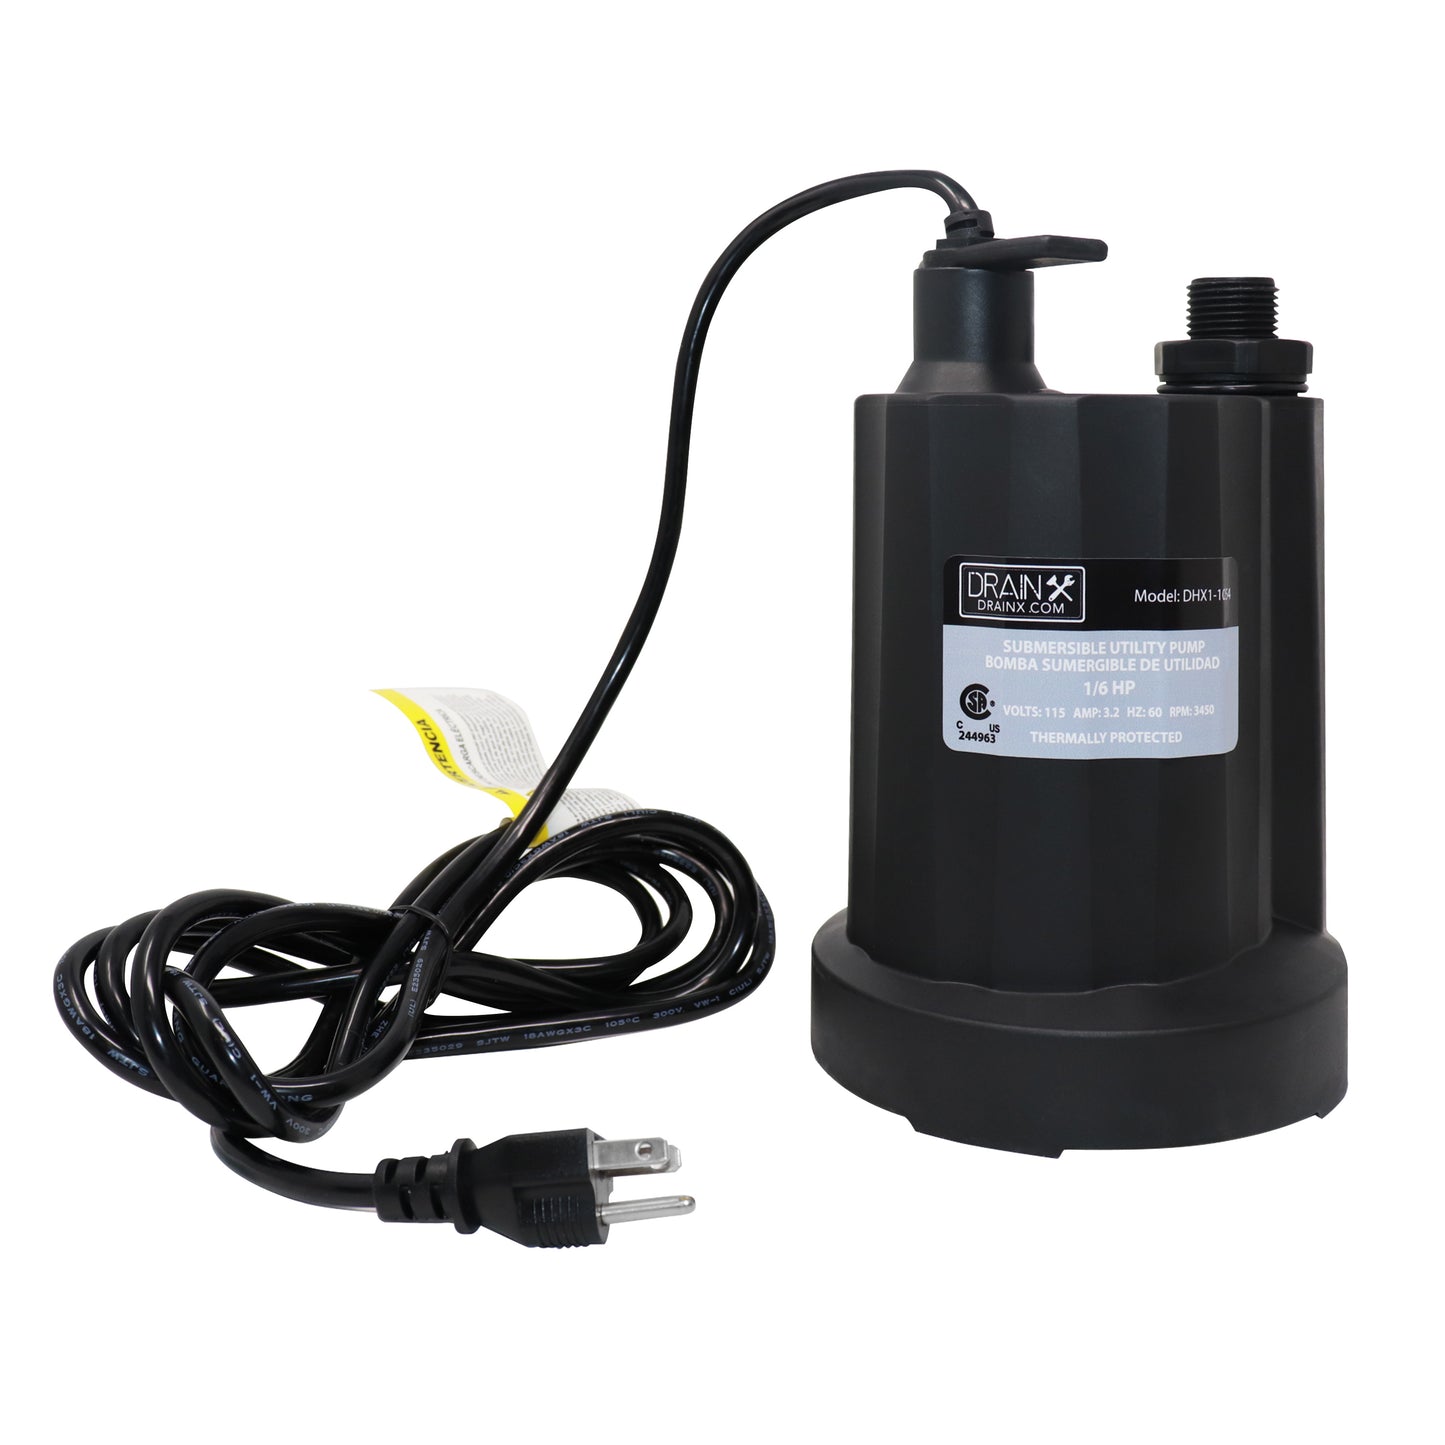 1/6 HP Submersible Corrosion-Resistant Utility Pump